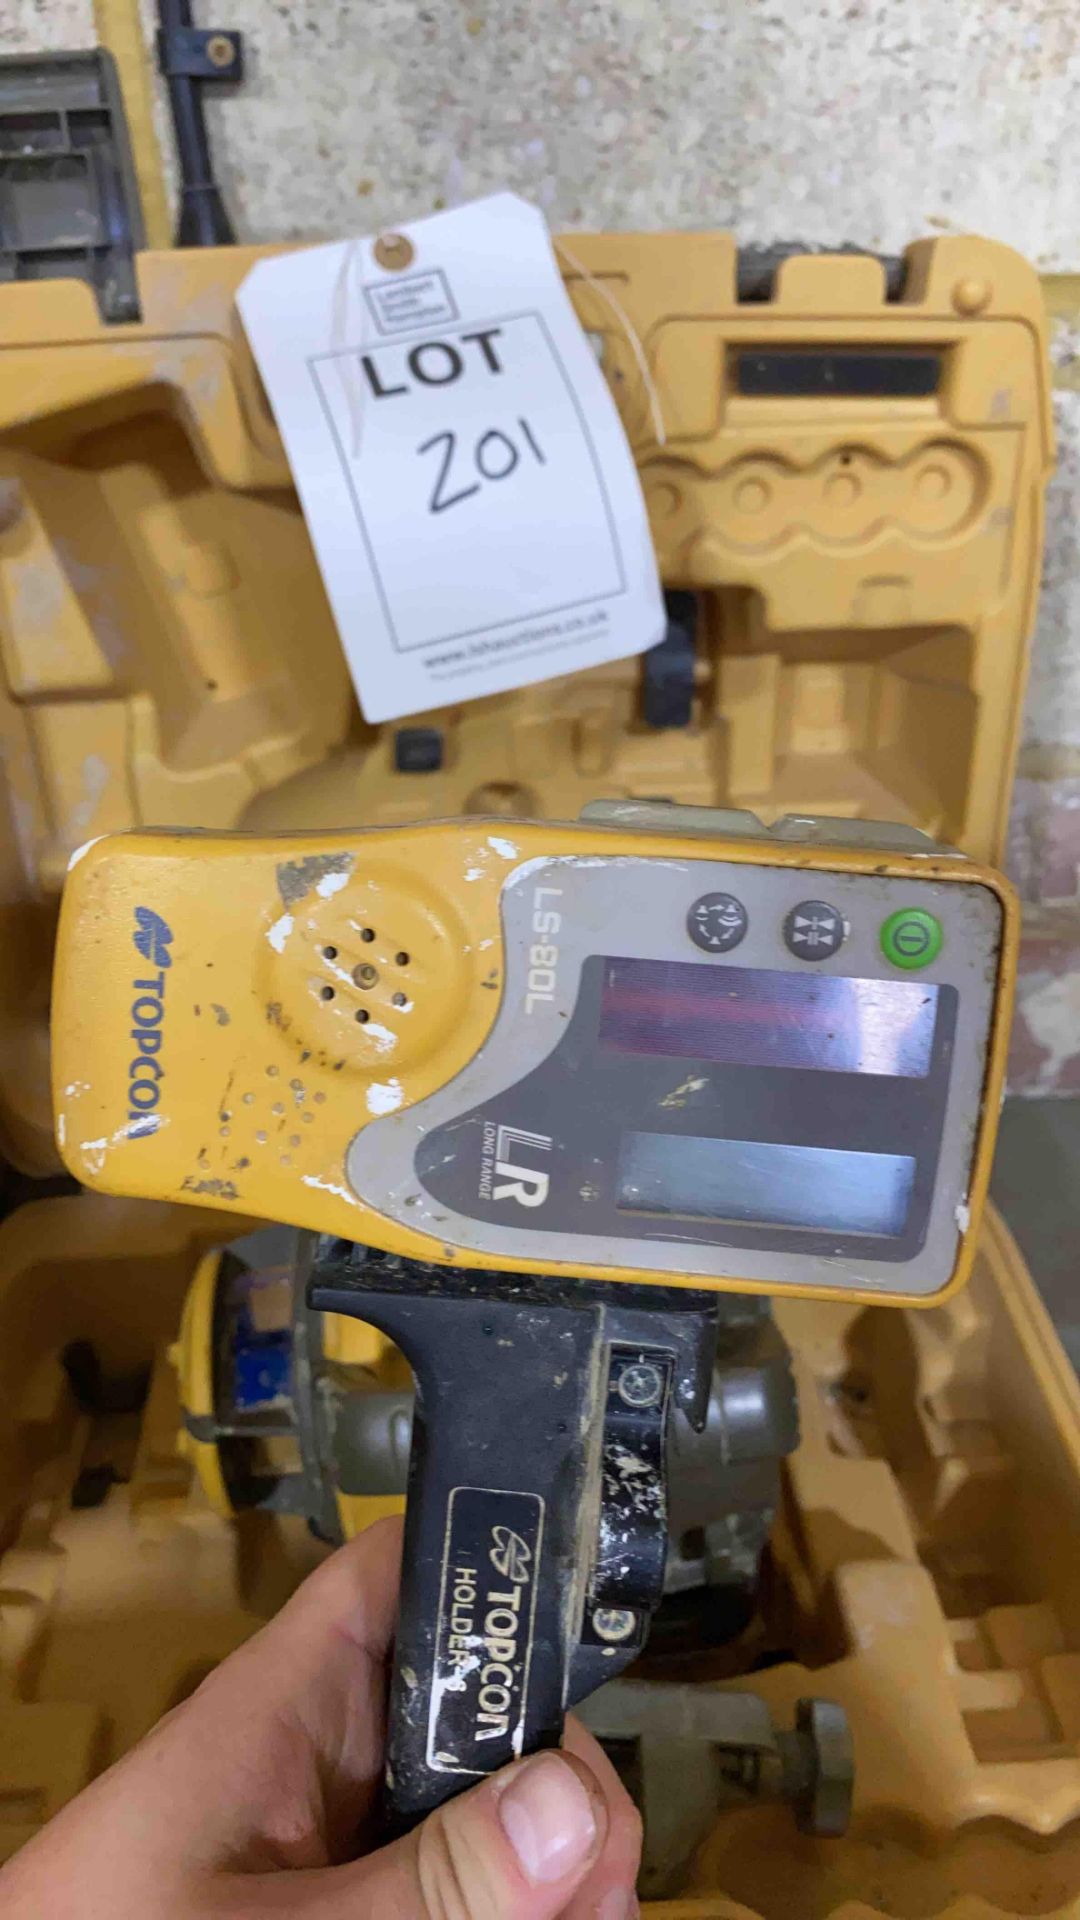 Topcon RL-H5 laser level complete with carry case and top con LS-80L handheld control - Image 4 of 4